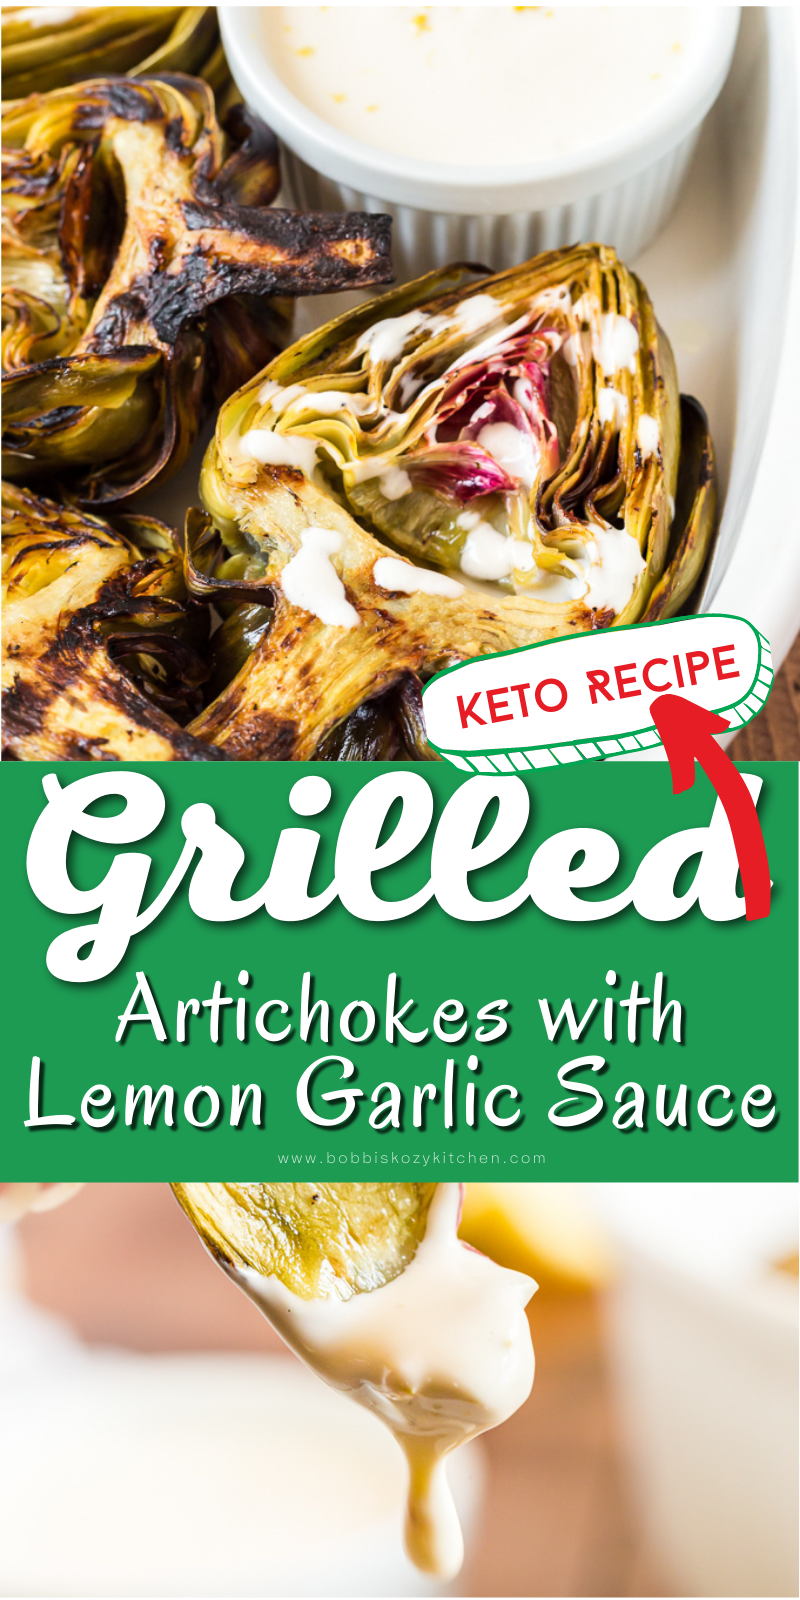 Grilled Artichokes with Lemon Garlic Sauce - Grilling makes everything taste better and these Grilled Artichokes with Lemon Garlic Sauce are proof of that! #keto #glutenfree #spring #summer #grilled #bbq #artichokes #lemon #garlic #lowcarb #easy #sidedish #recipe